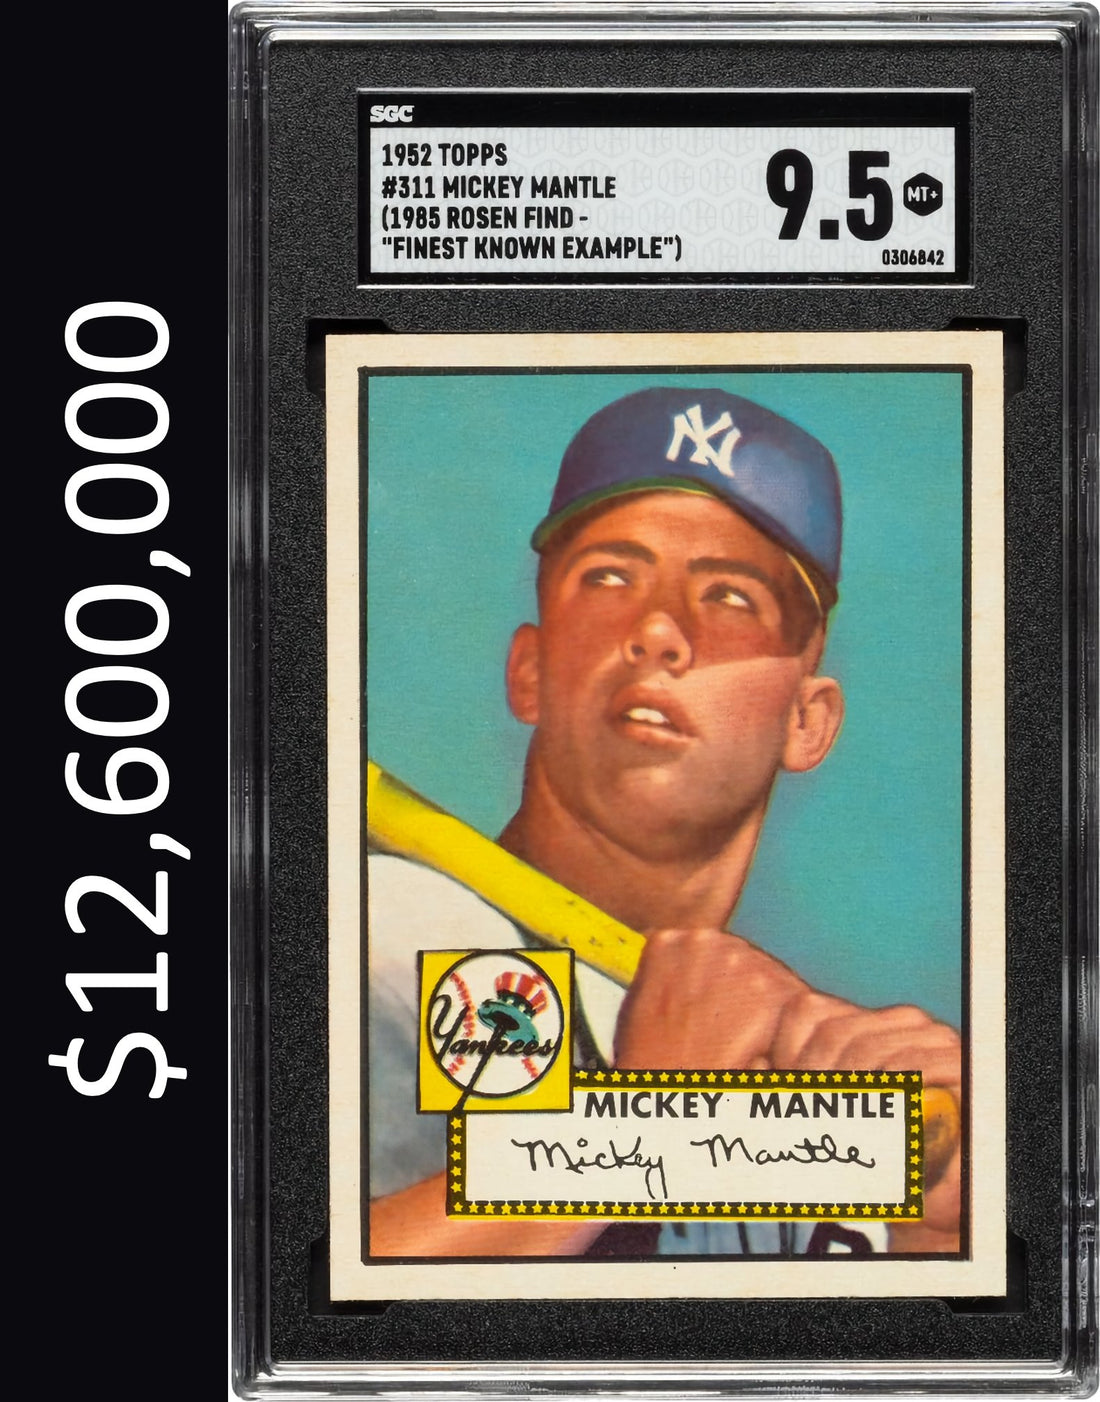 1952 Topps Mickey Mantle #311 - The MOST VALUABLE baseball card of all time - so far! - SportsCardsEDGE